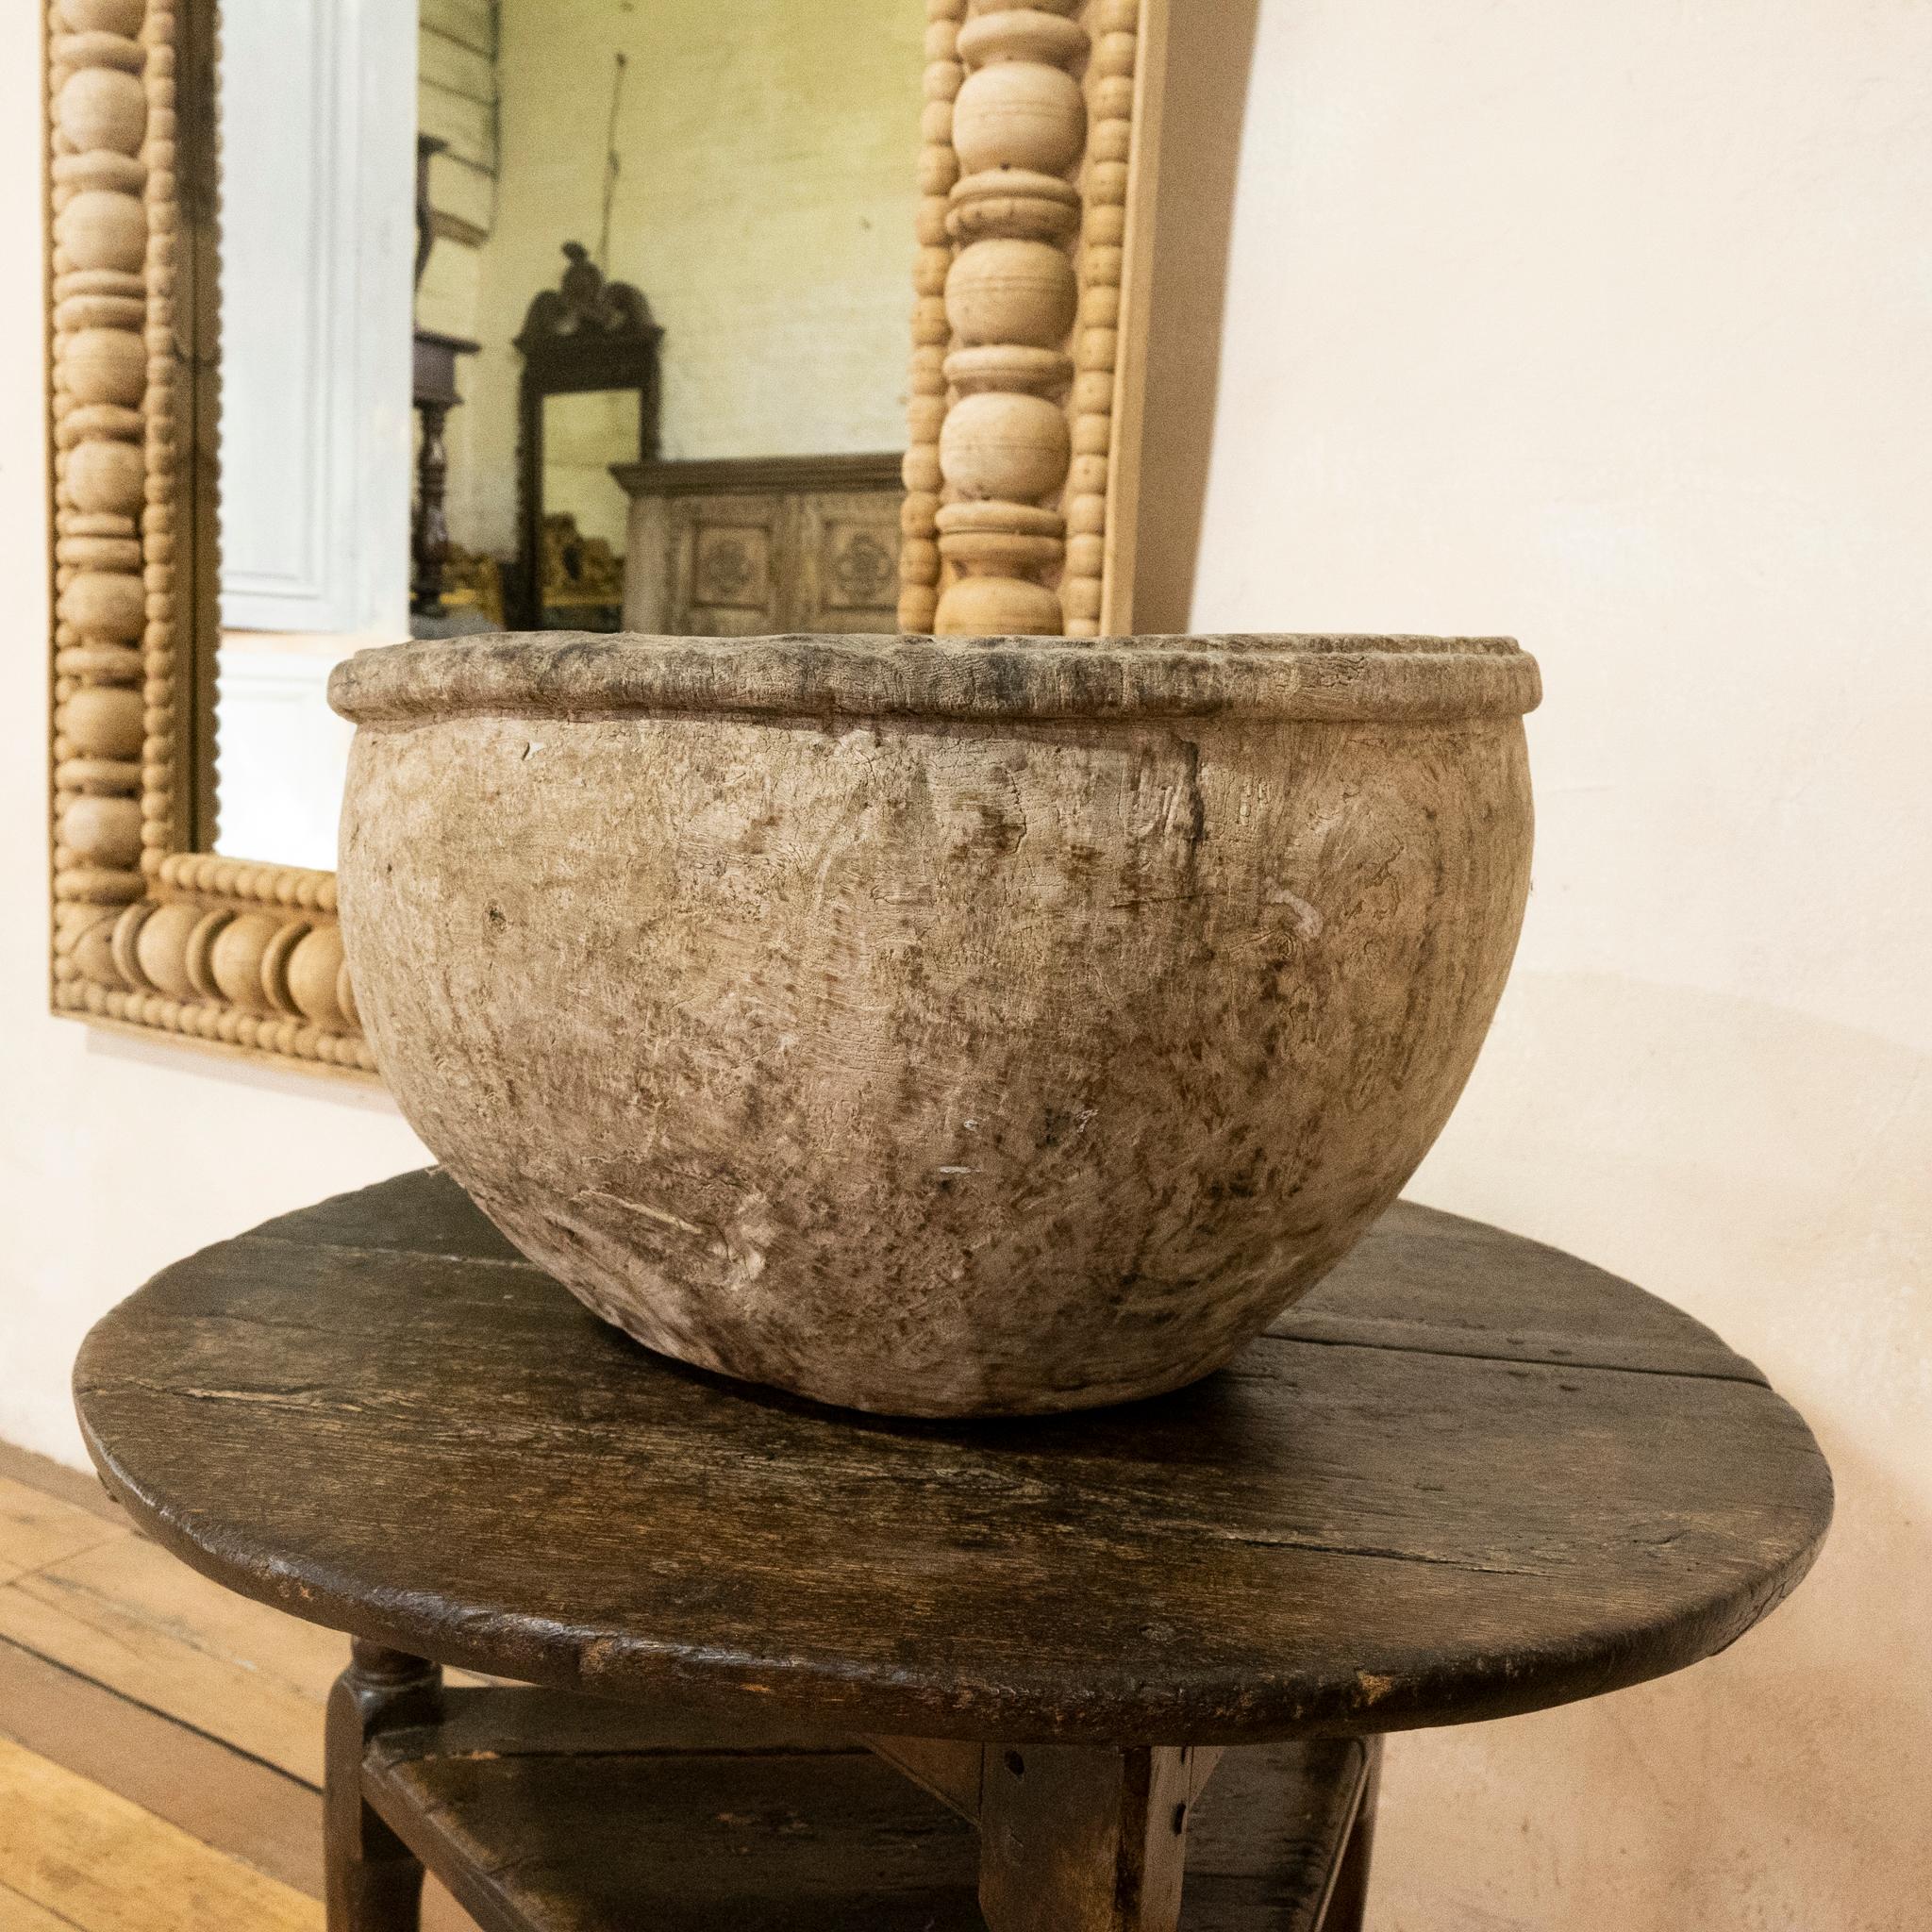 An exceptional large 18th century primitive Swedish carved wooden burl root or knot bowl. Demonstrating a dry textured surface displaying a fabulous aged patina. A truly remarkable piece, that would make a great statement in any room!
 
Measures: